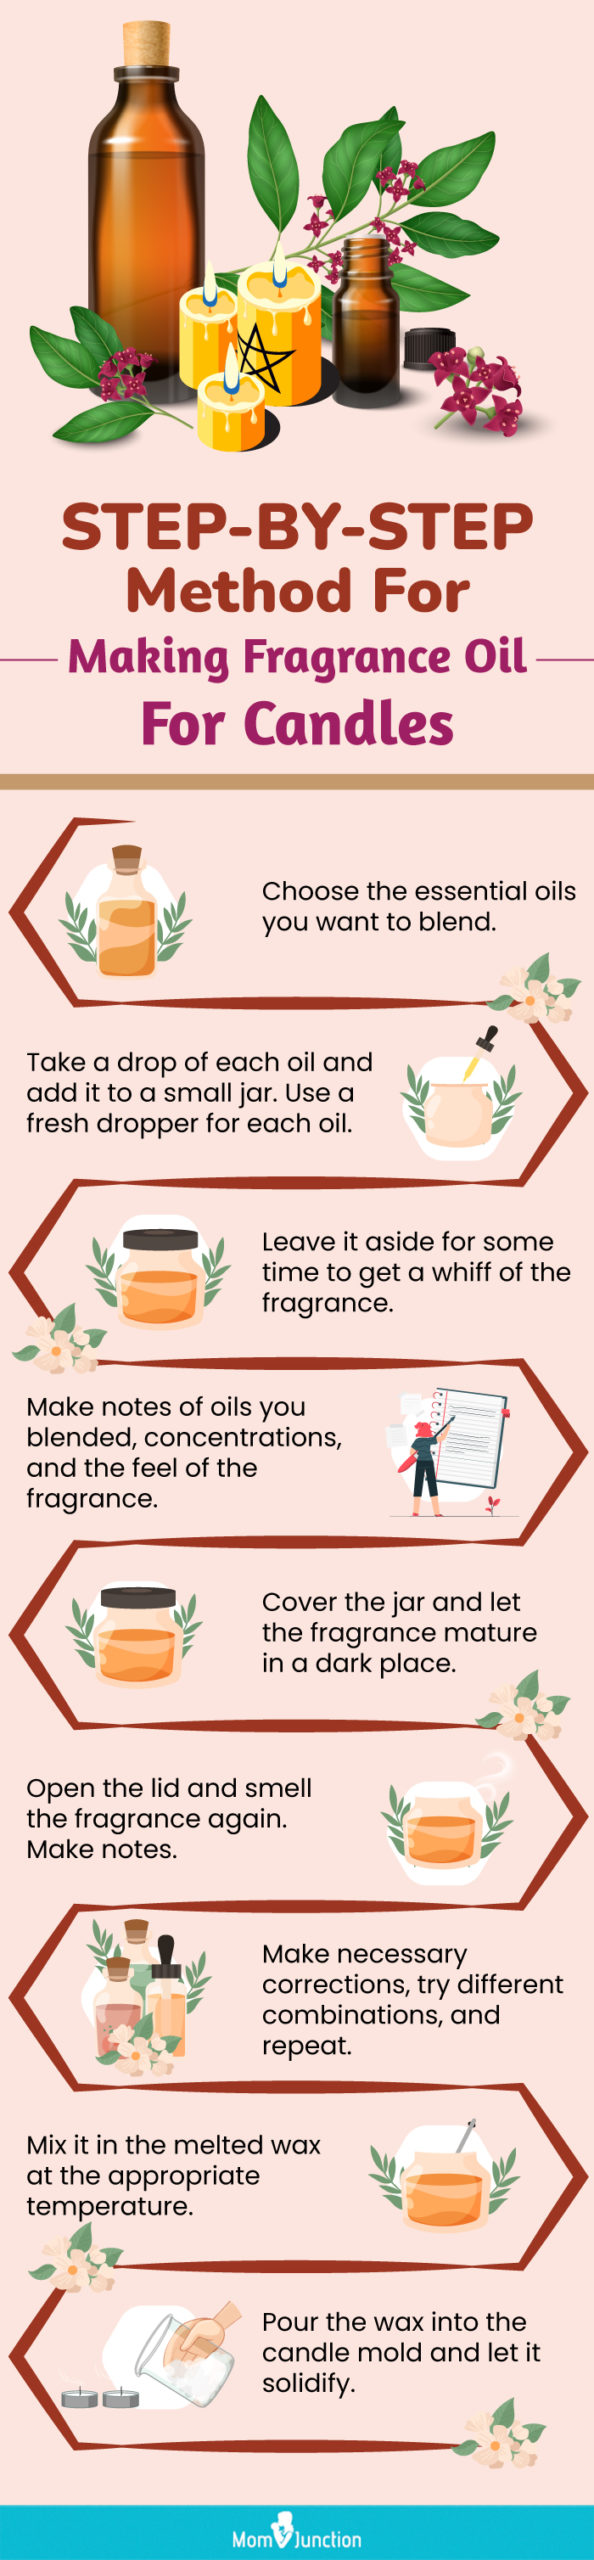 Fragrance Oil Vs Essential Oil in Candle Making – Craft Gossip